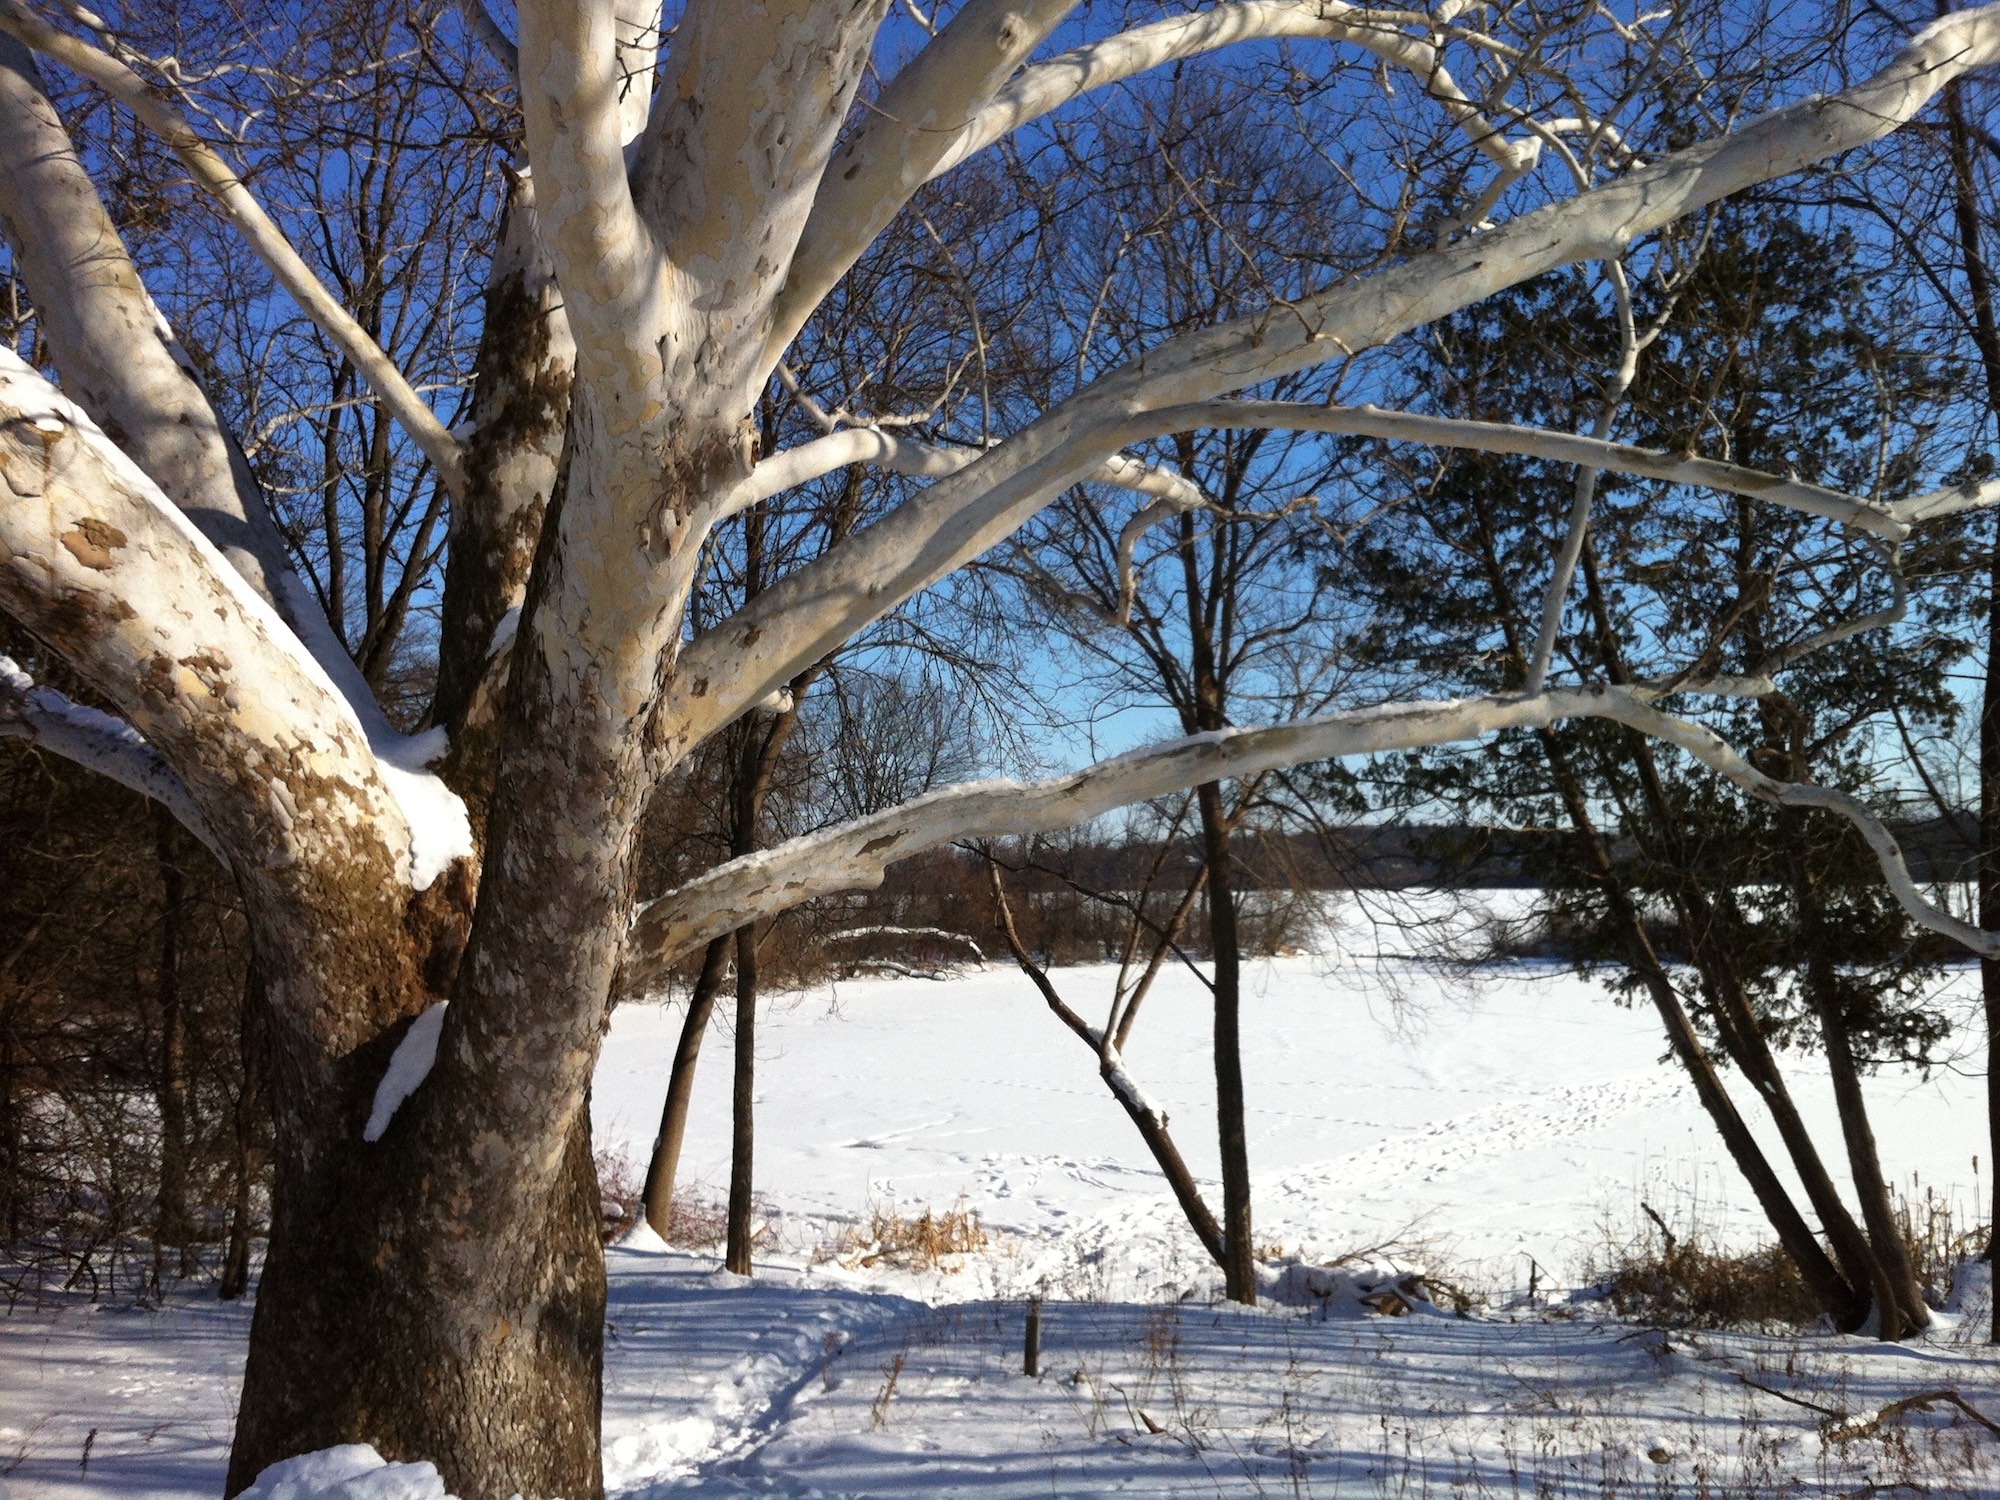 Sycamore tree between Ho-Nee-Um Pond and Arbor Drive on north shore of Lake Wingra on February 5, 2015.